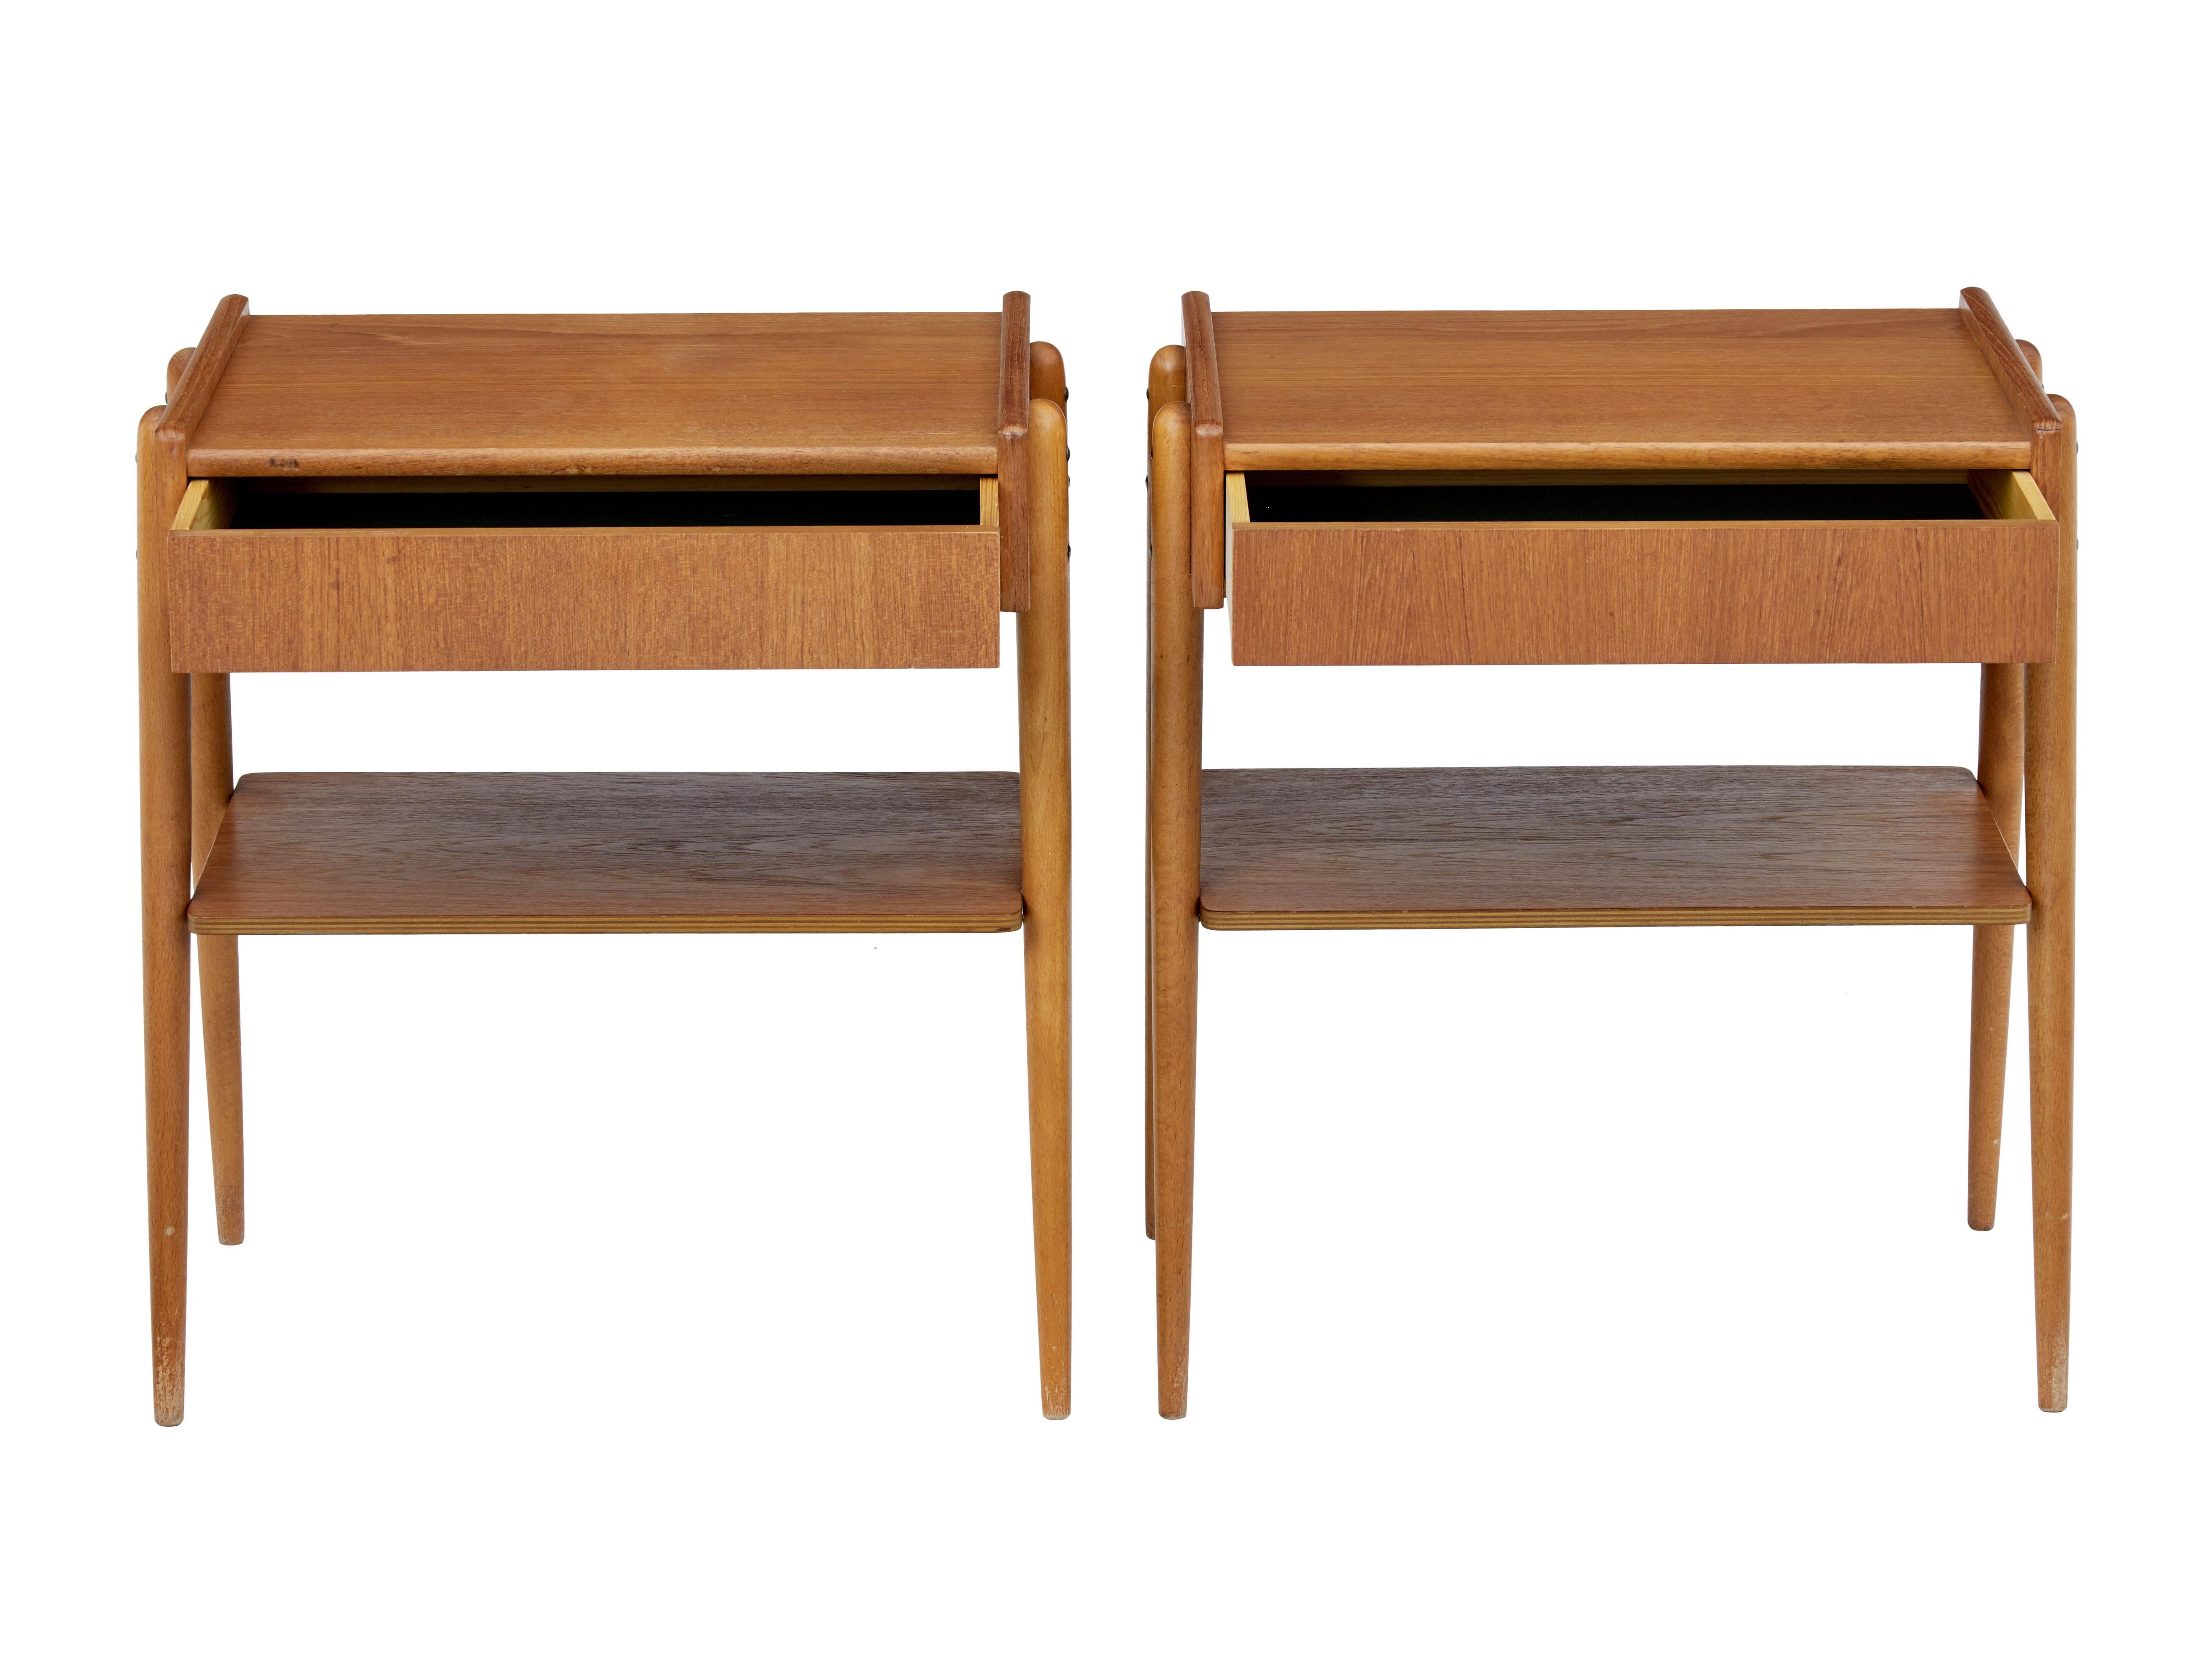 Fine pair of Scandinavian teak bedside tables, circa 1960.

Teak top surface with single drawer below. Design allows the leg structure on the outside which supports the shelf.

Minor surface marks.